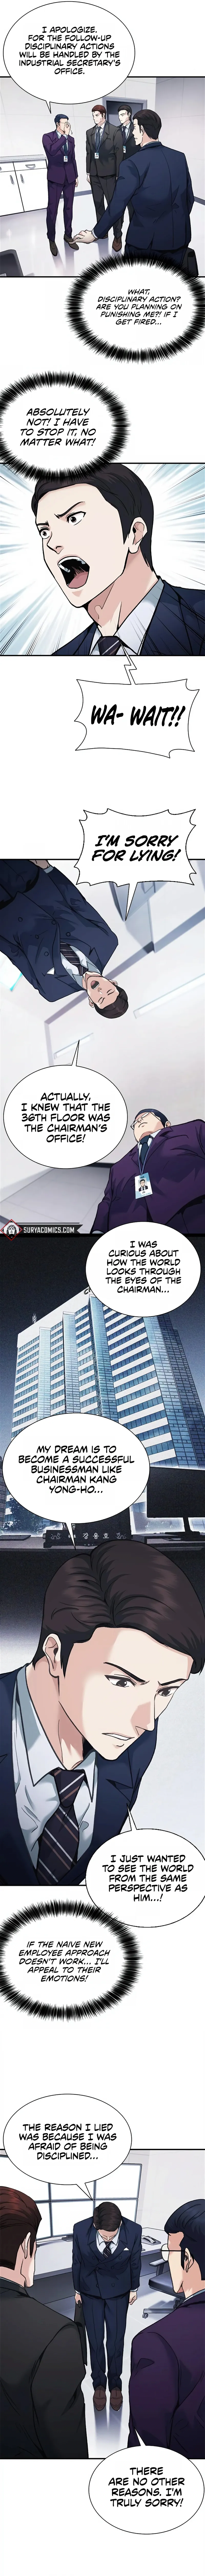 Chairman Kang: The Newcomer Chapter 21 page 9